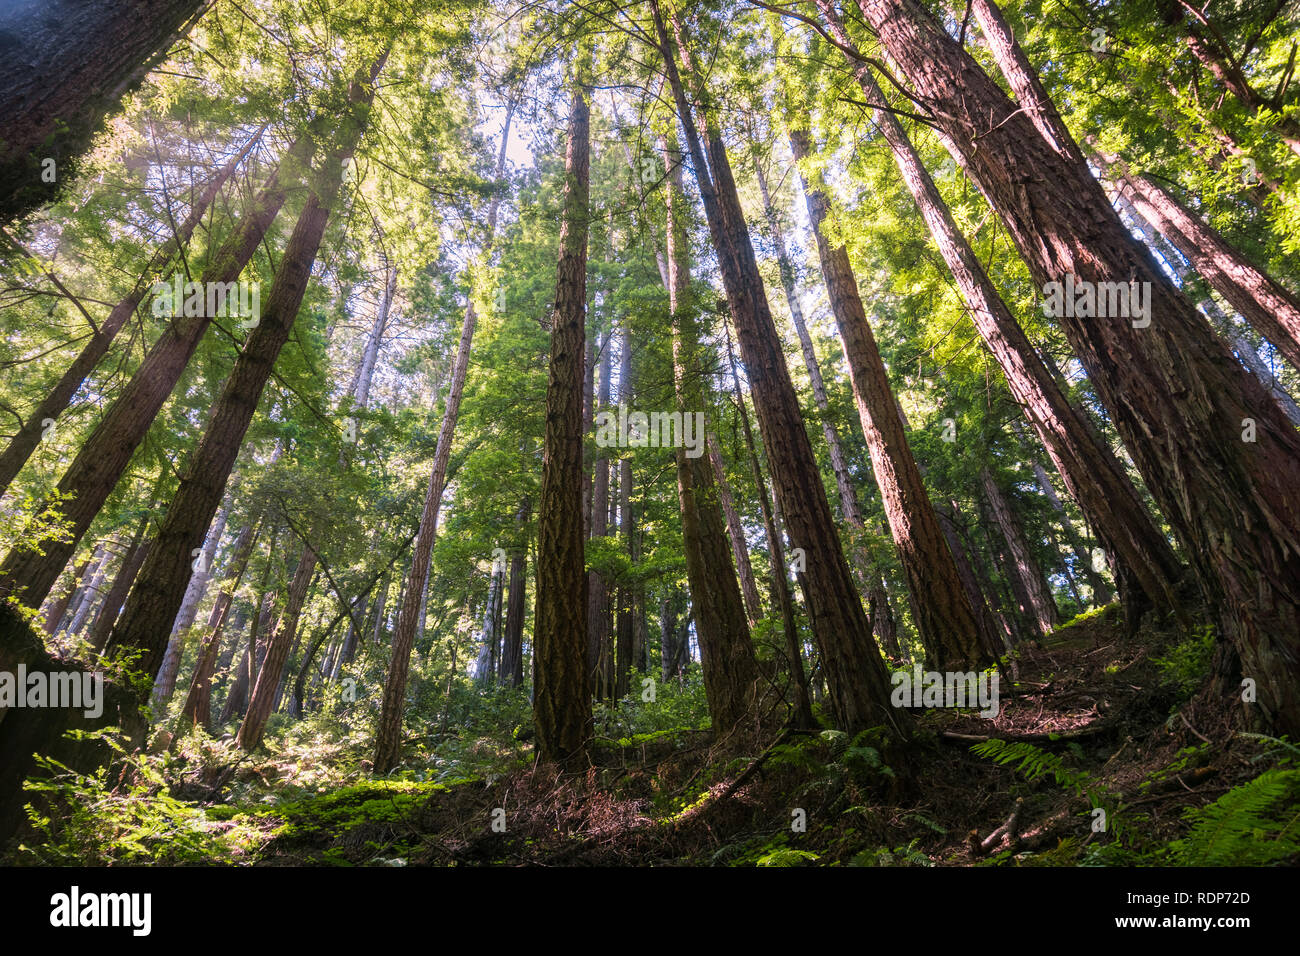 Redwood trees (Sequoia sempervirens) forest, California Stock Photo